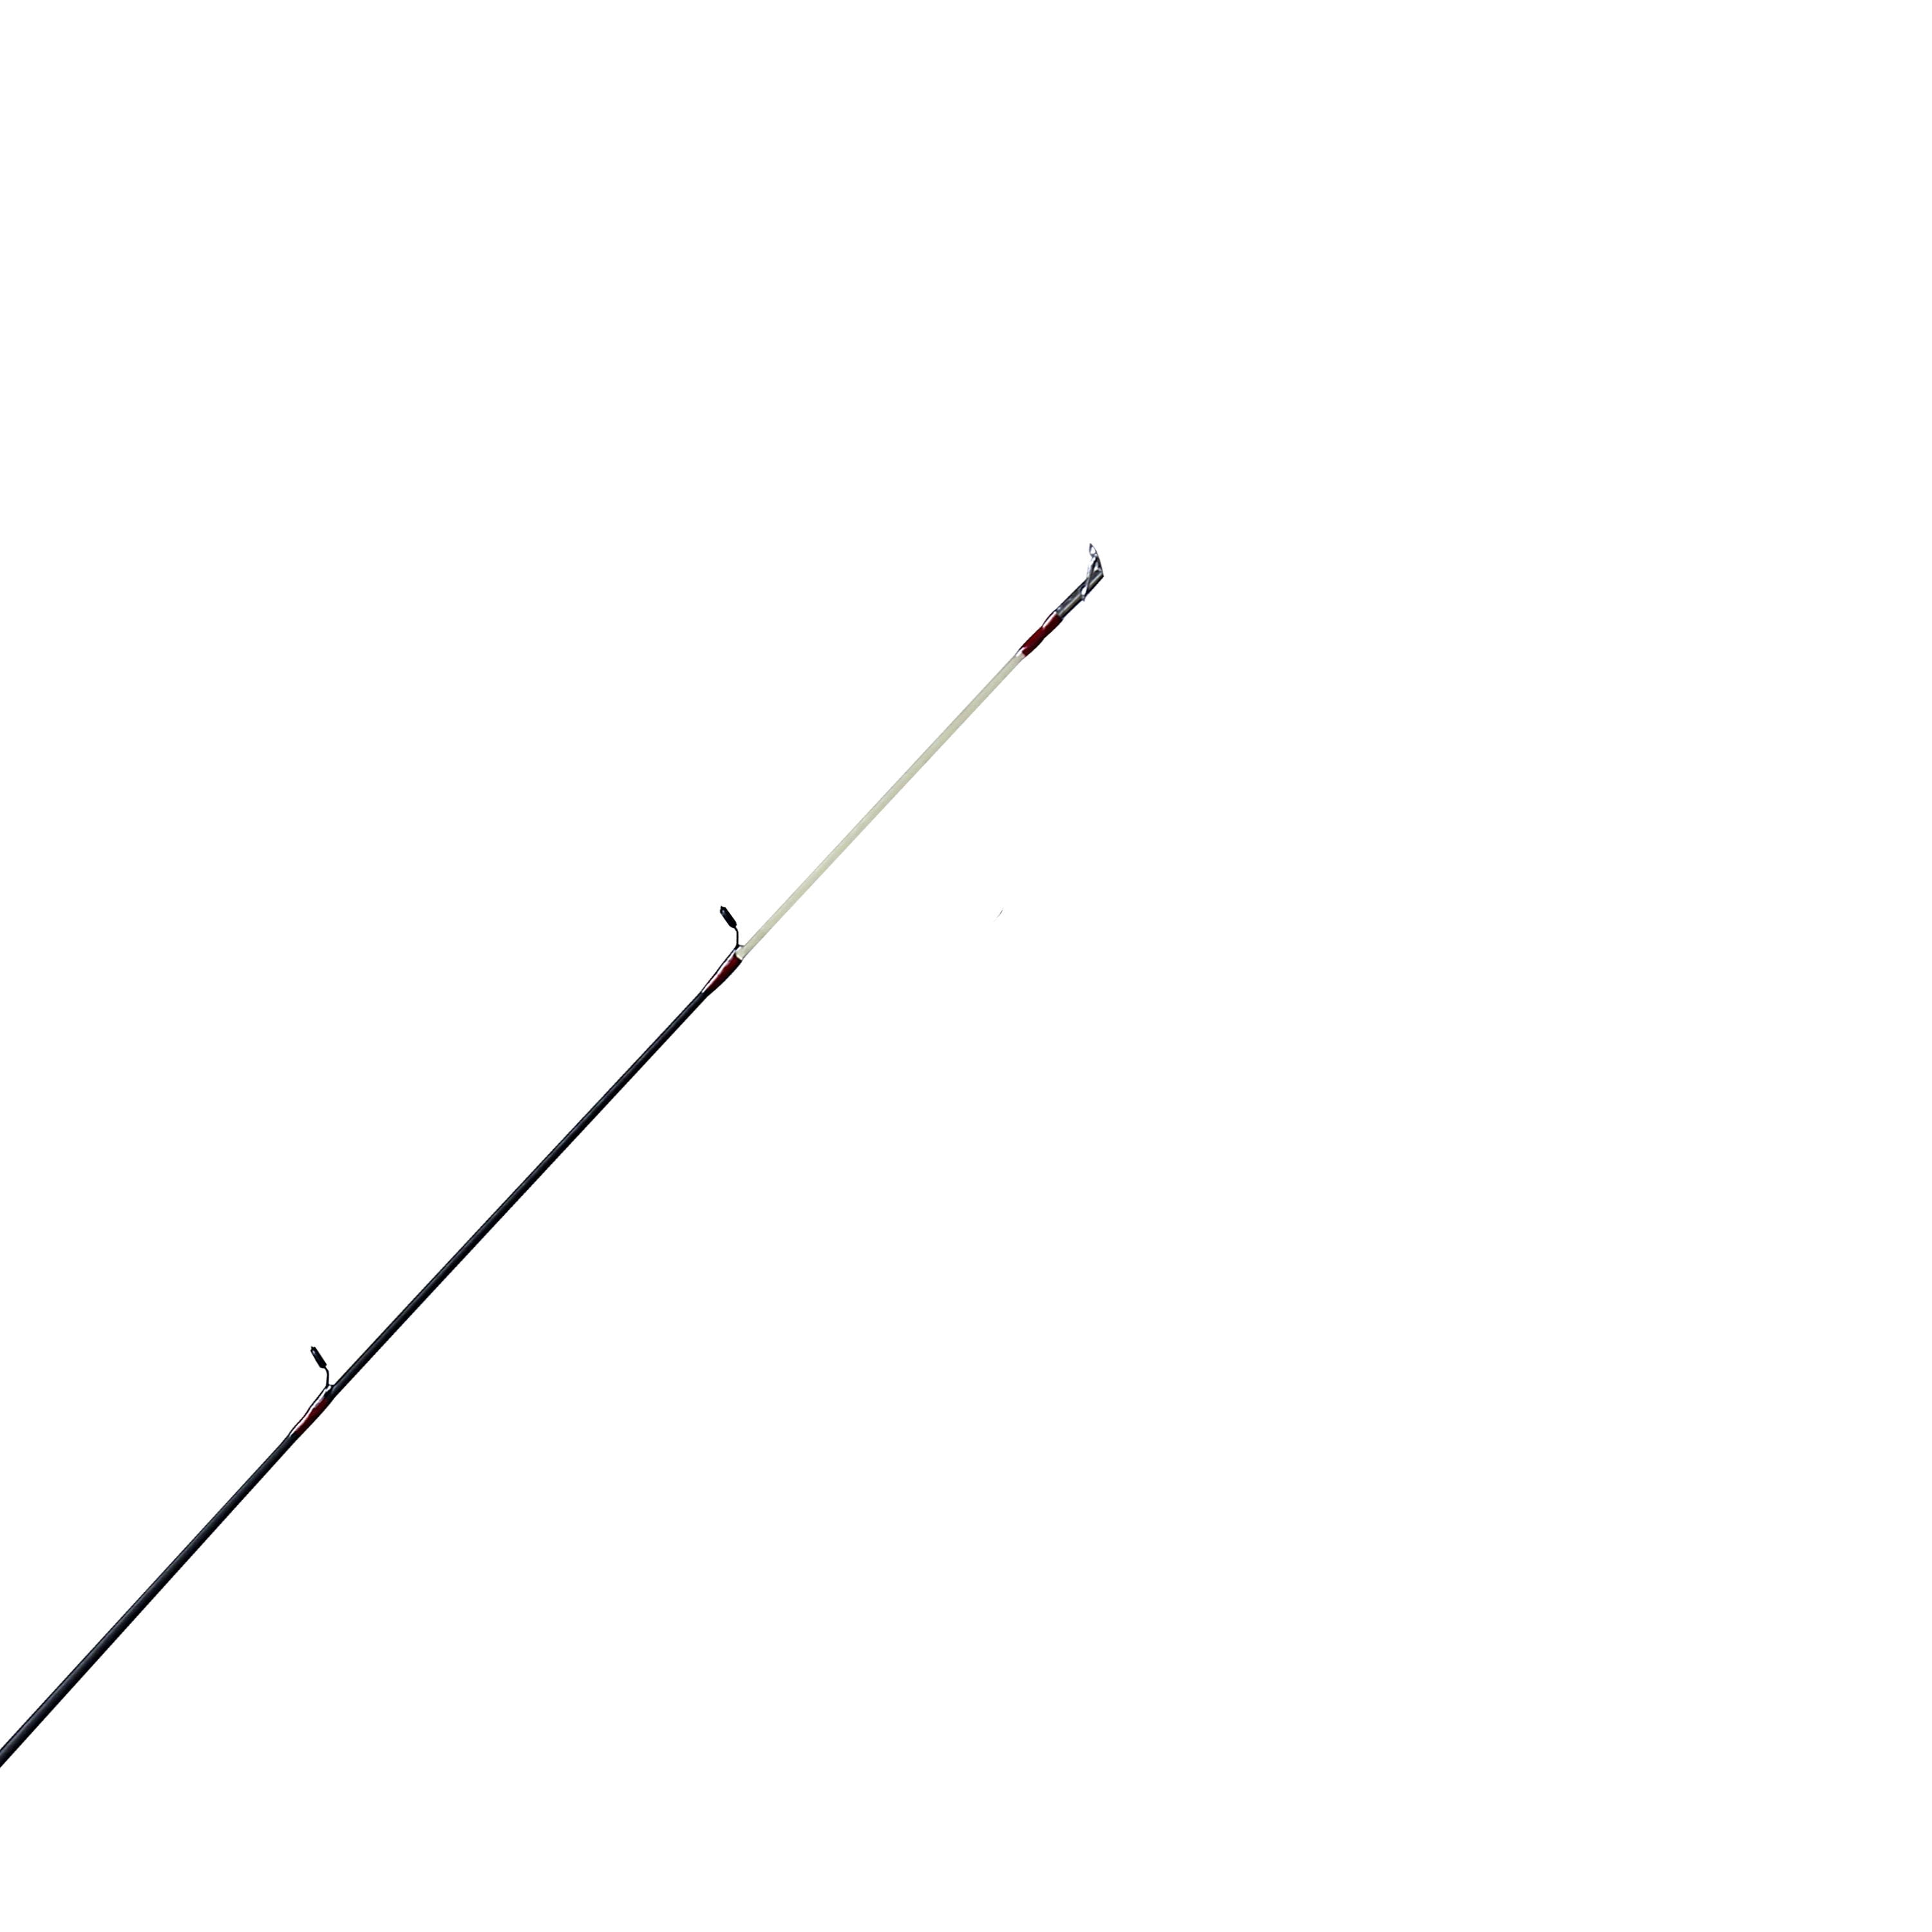 Details about    6'6" Zebco Rhino Medium 2 Pc.Spinning Rod W/Glow Tip RNS662MWG 